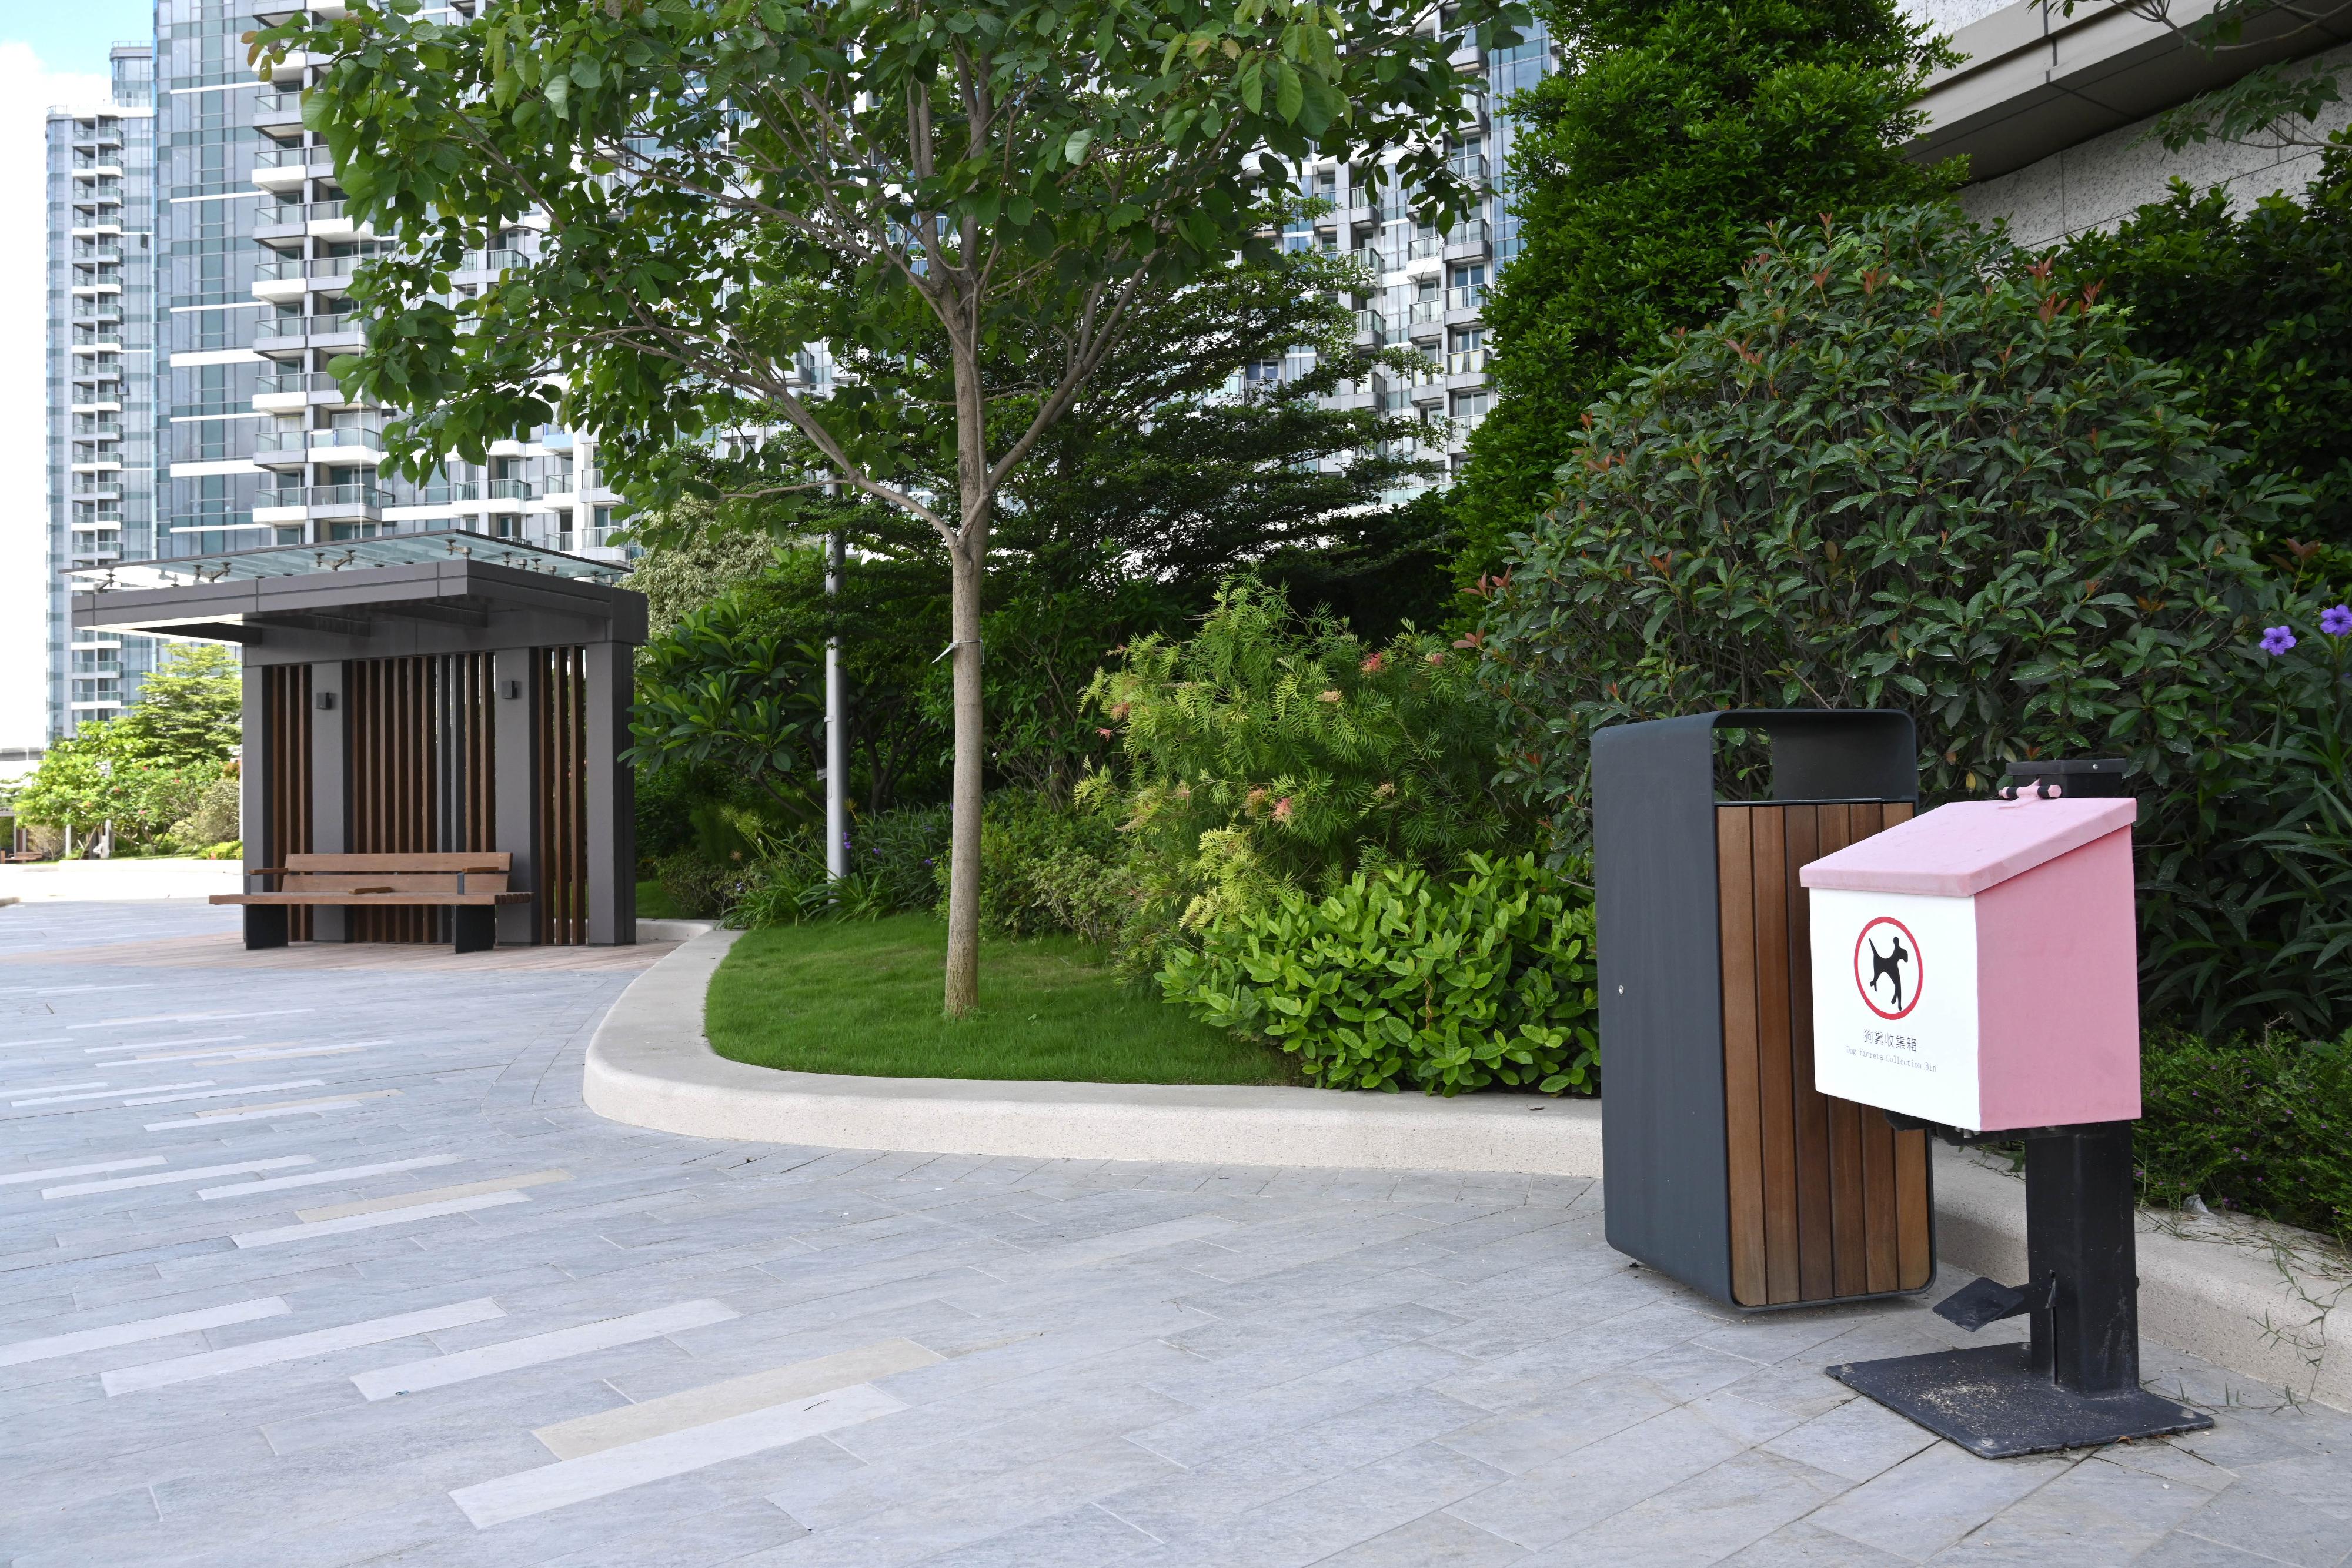 The Leisure and Cultural Services Department announced today (July 14) that the newly built Cheung Sha Wan Promenade is now fully opened for public use. It also serves as an Inclusive Park for Pets for the public. Park users with or without pets could enjoy park facilities together in an inclusive environment.


